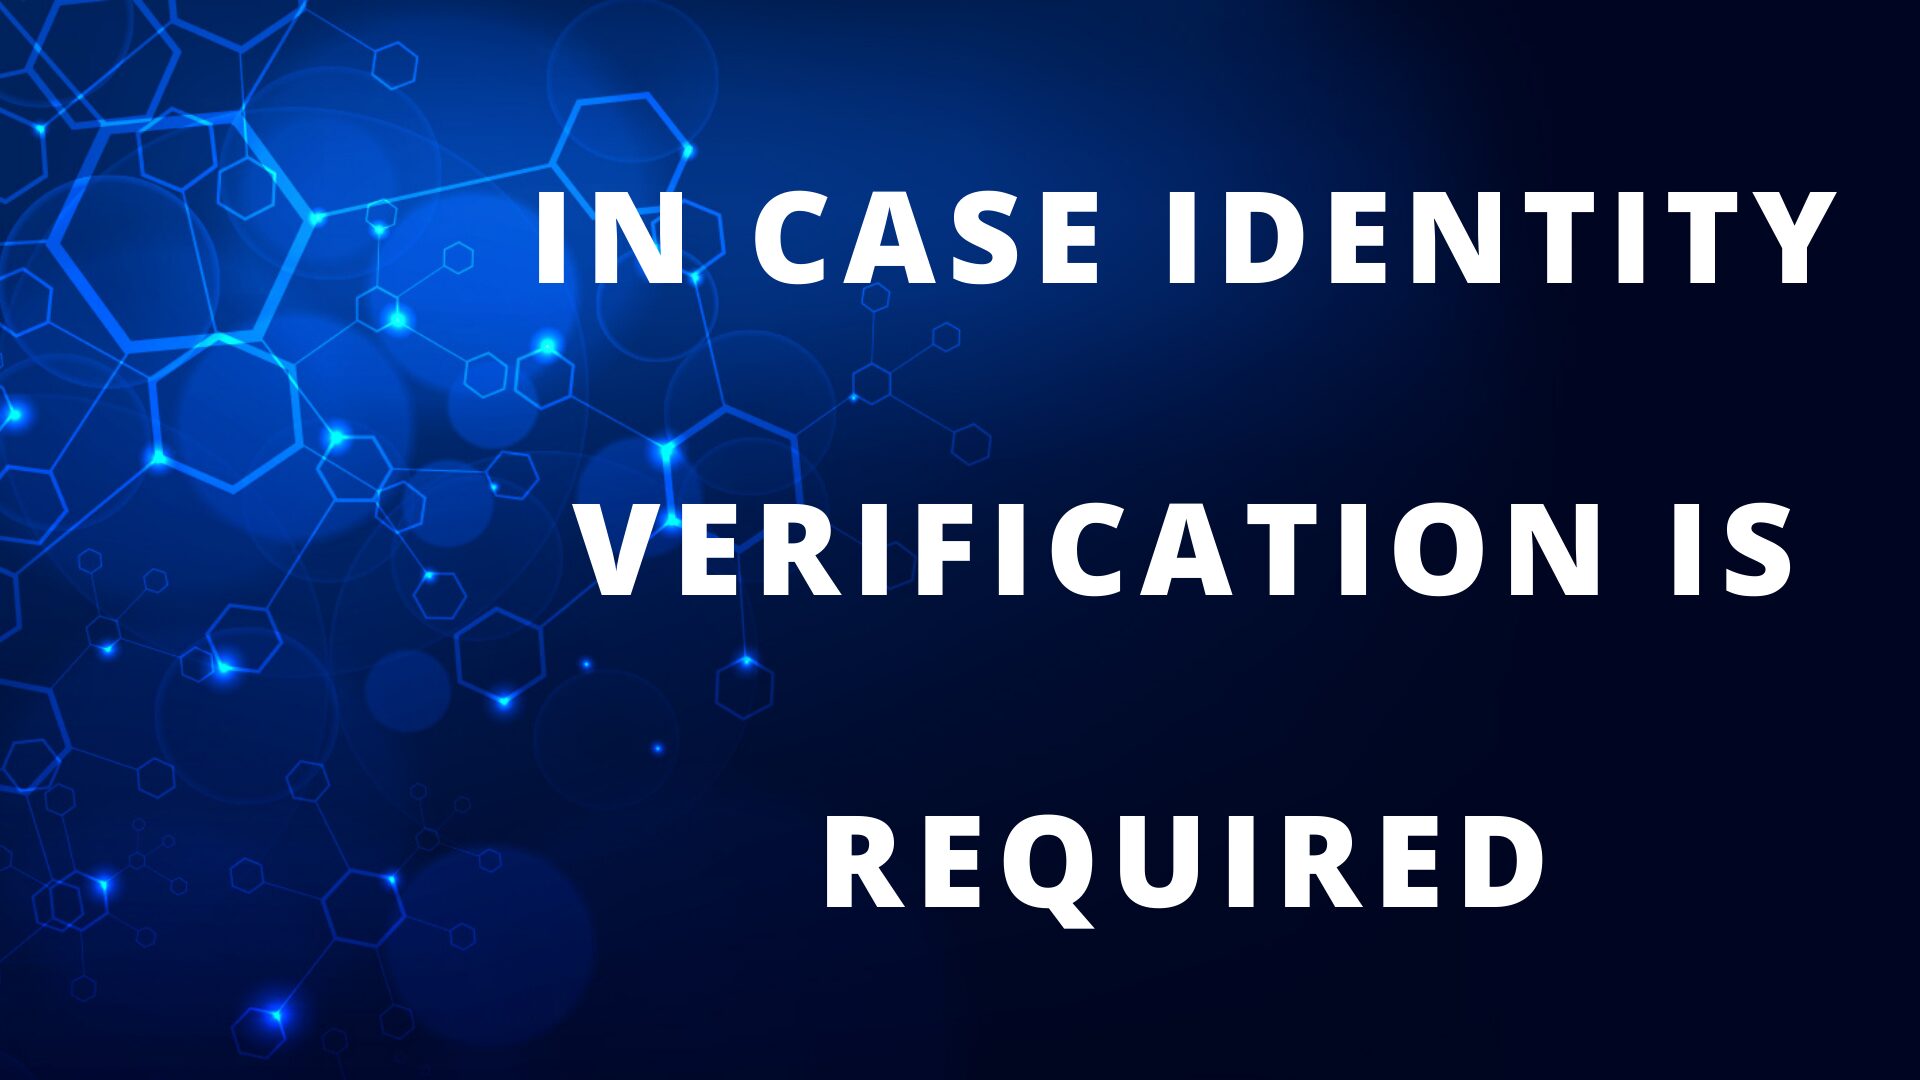 In case identity verification is required